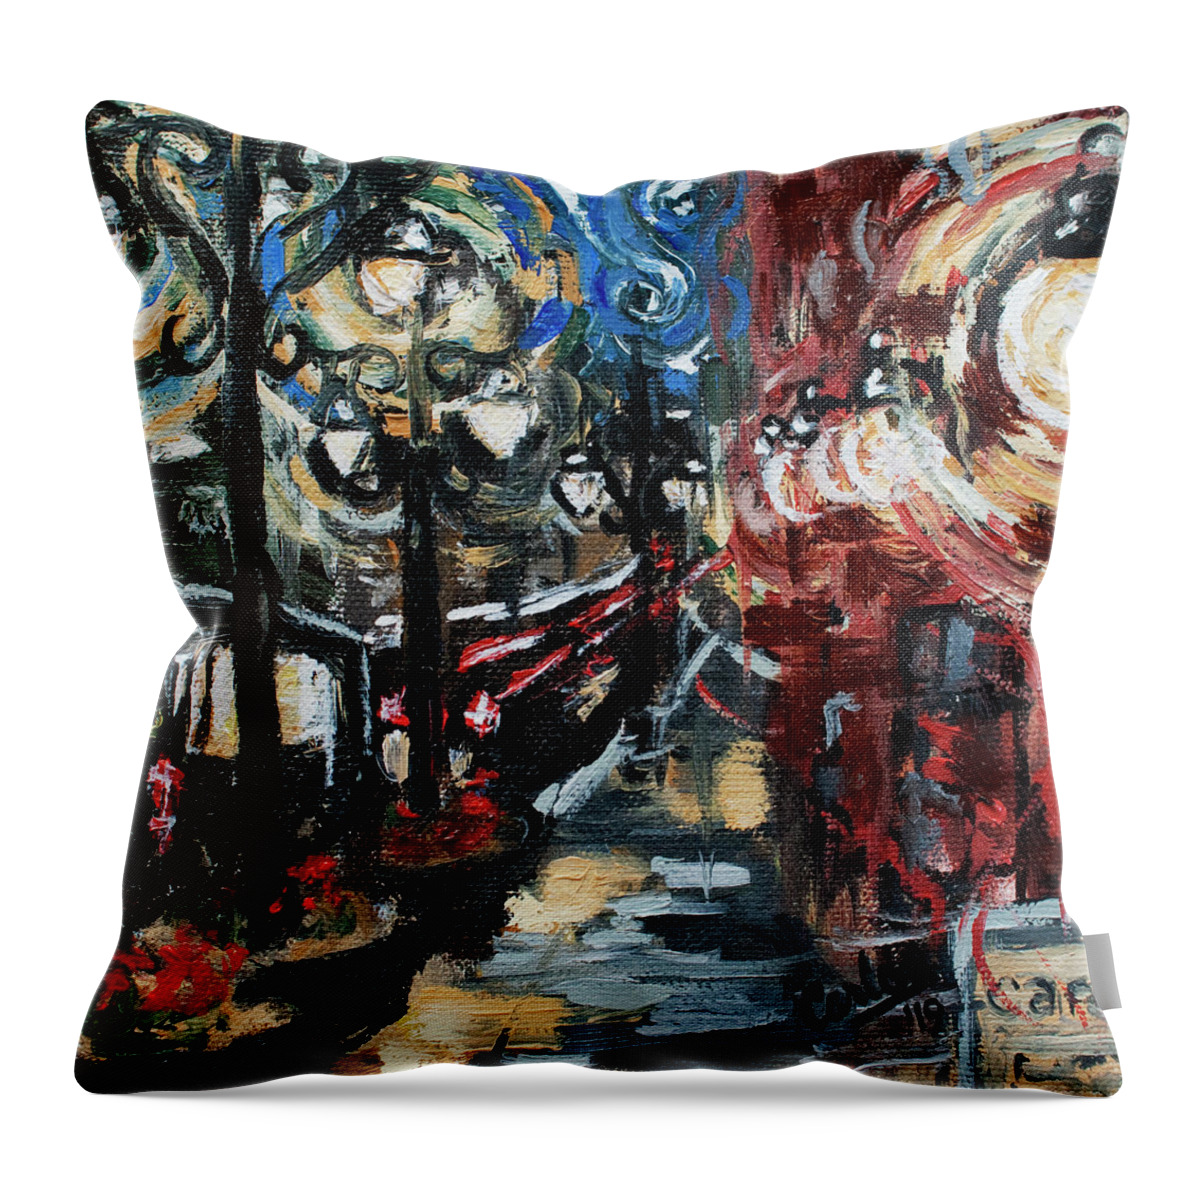 City Throw Pillow featuring the painting 17th Street Denver by Carlos Flores